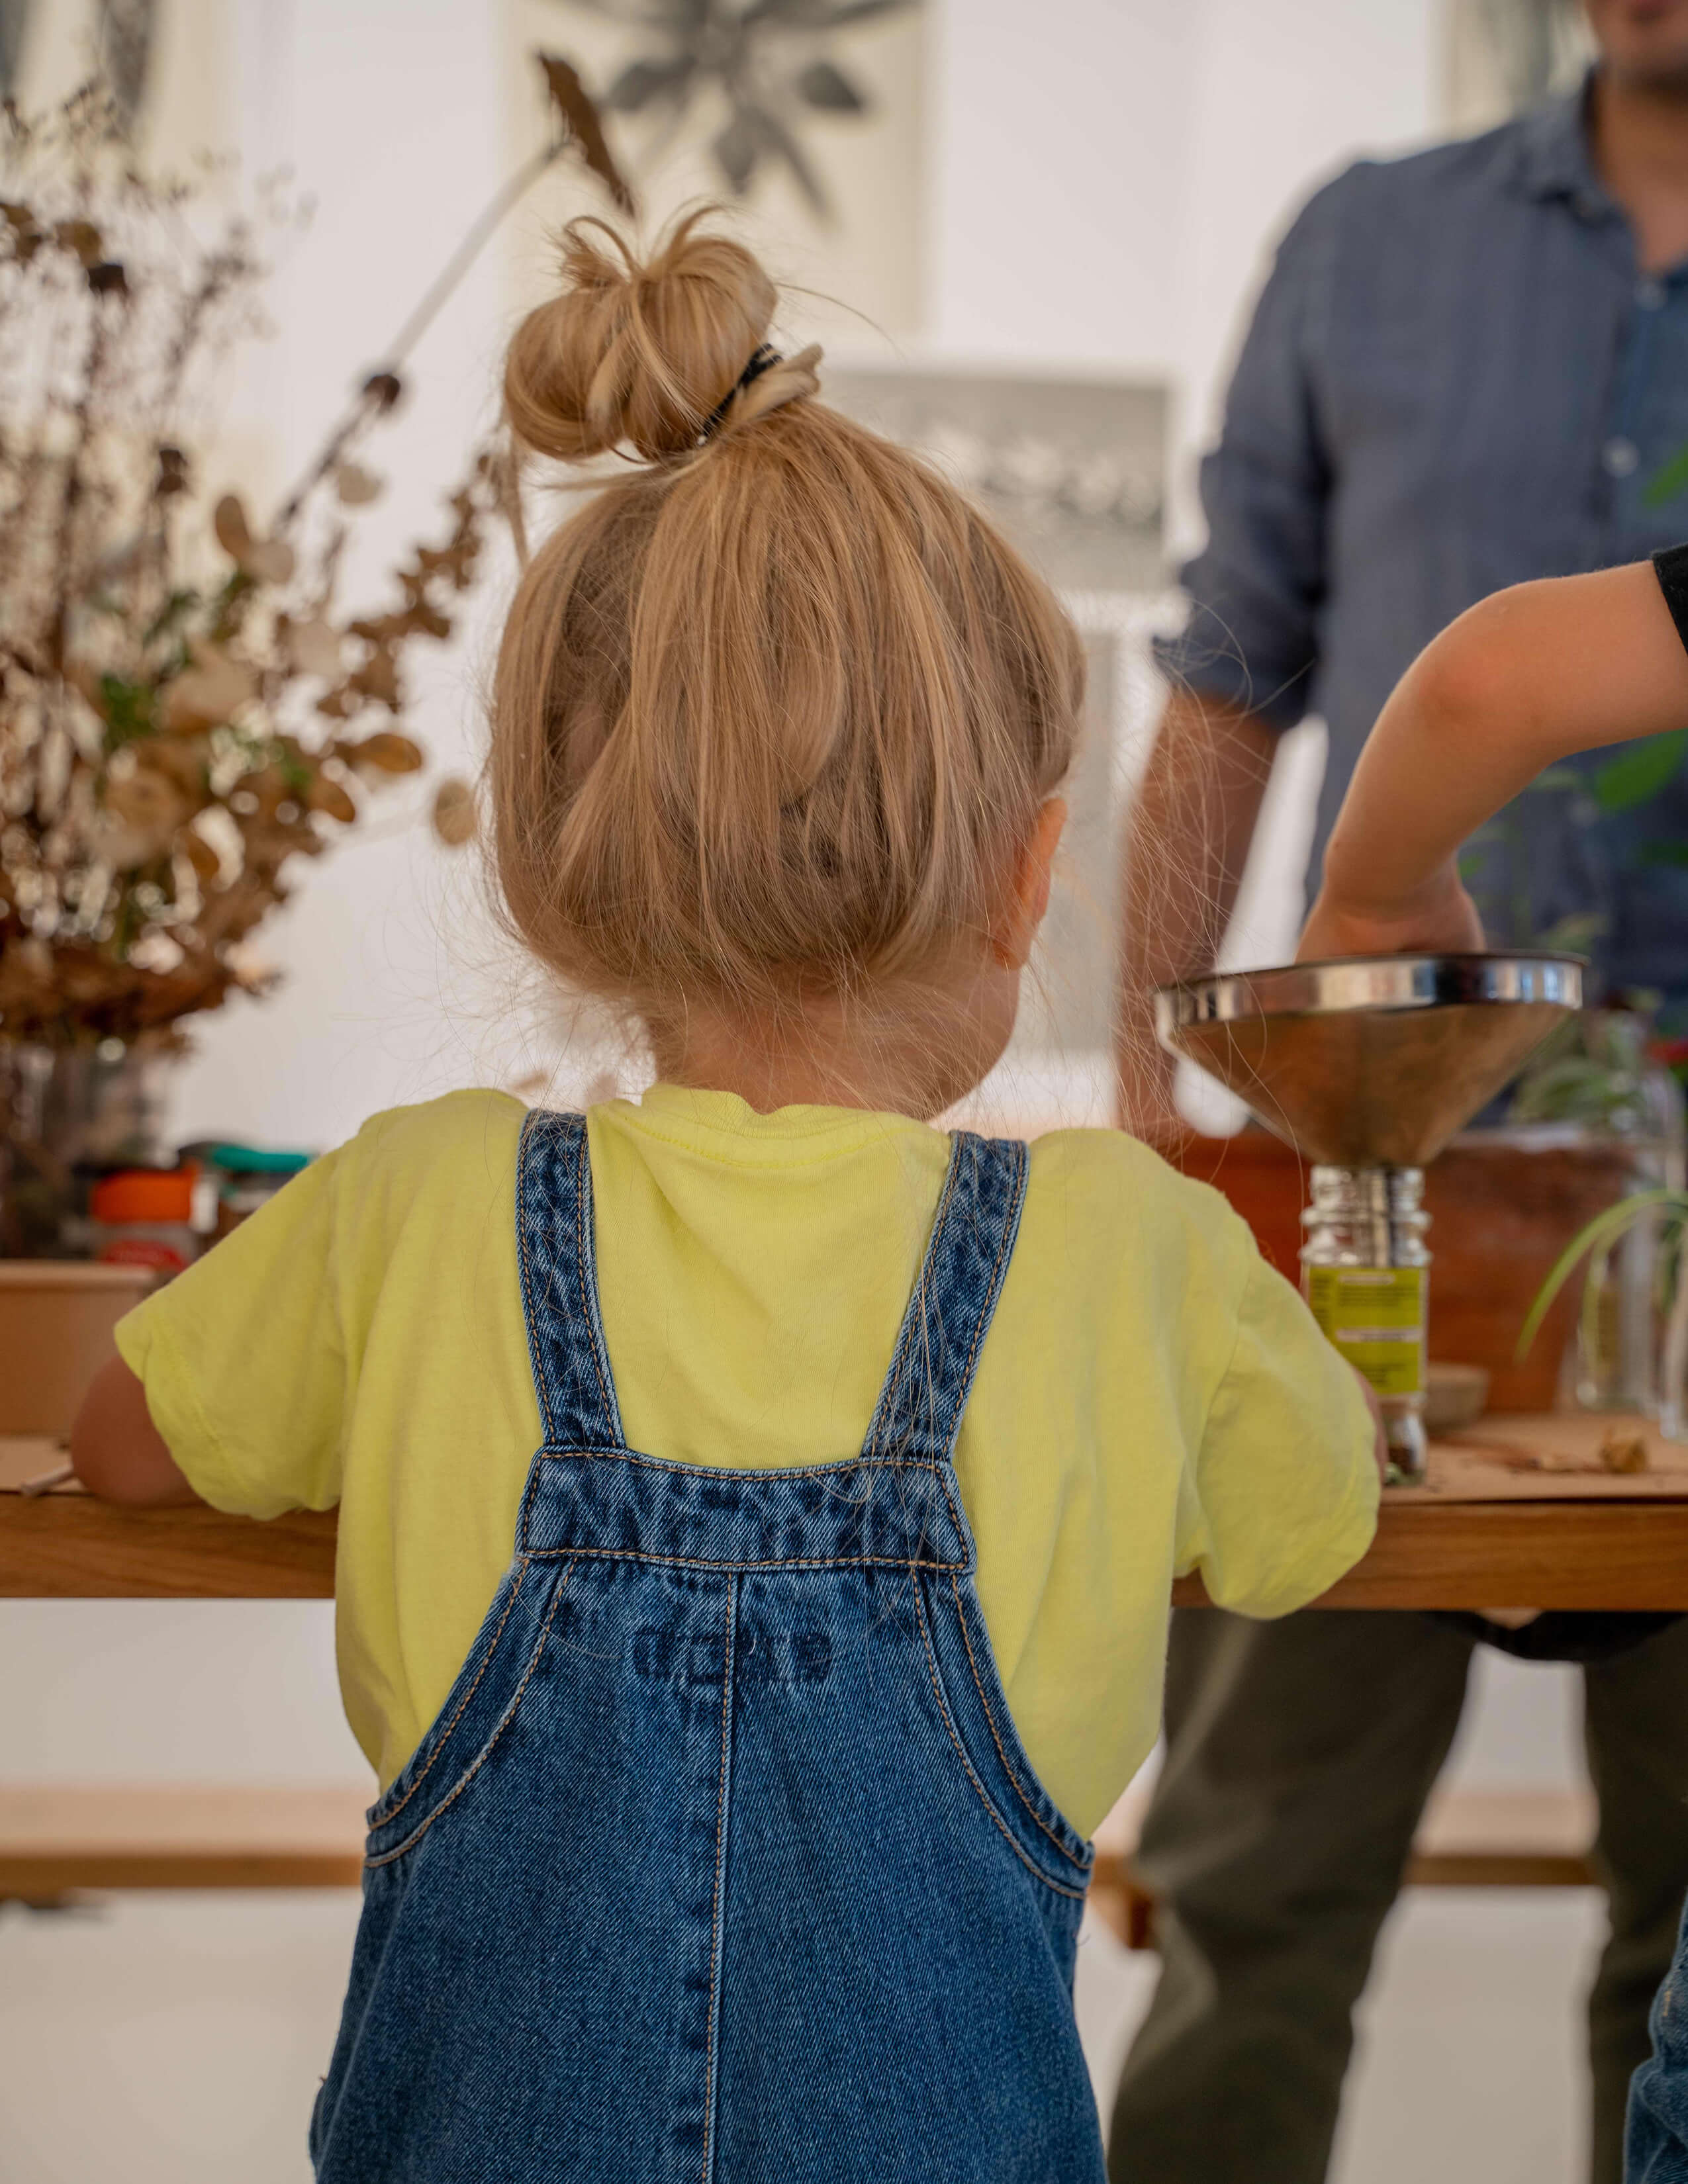 A kid with blonde tied-up bun hair wore a yellow jumper underneath the denim dungarees looking at people working on the table.